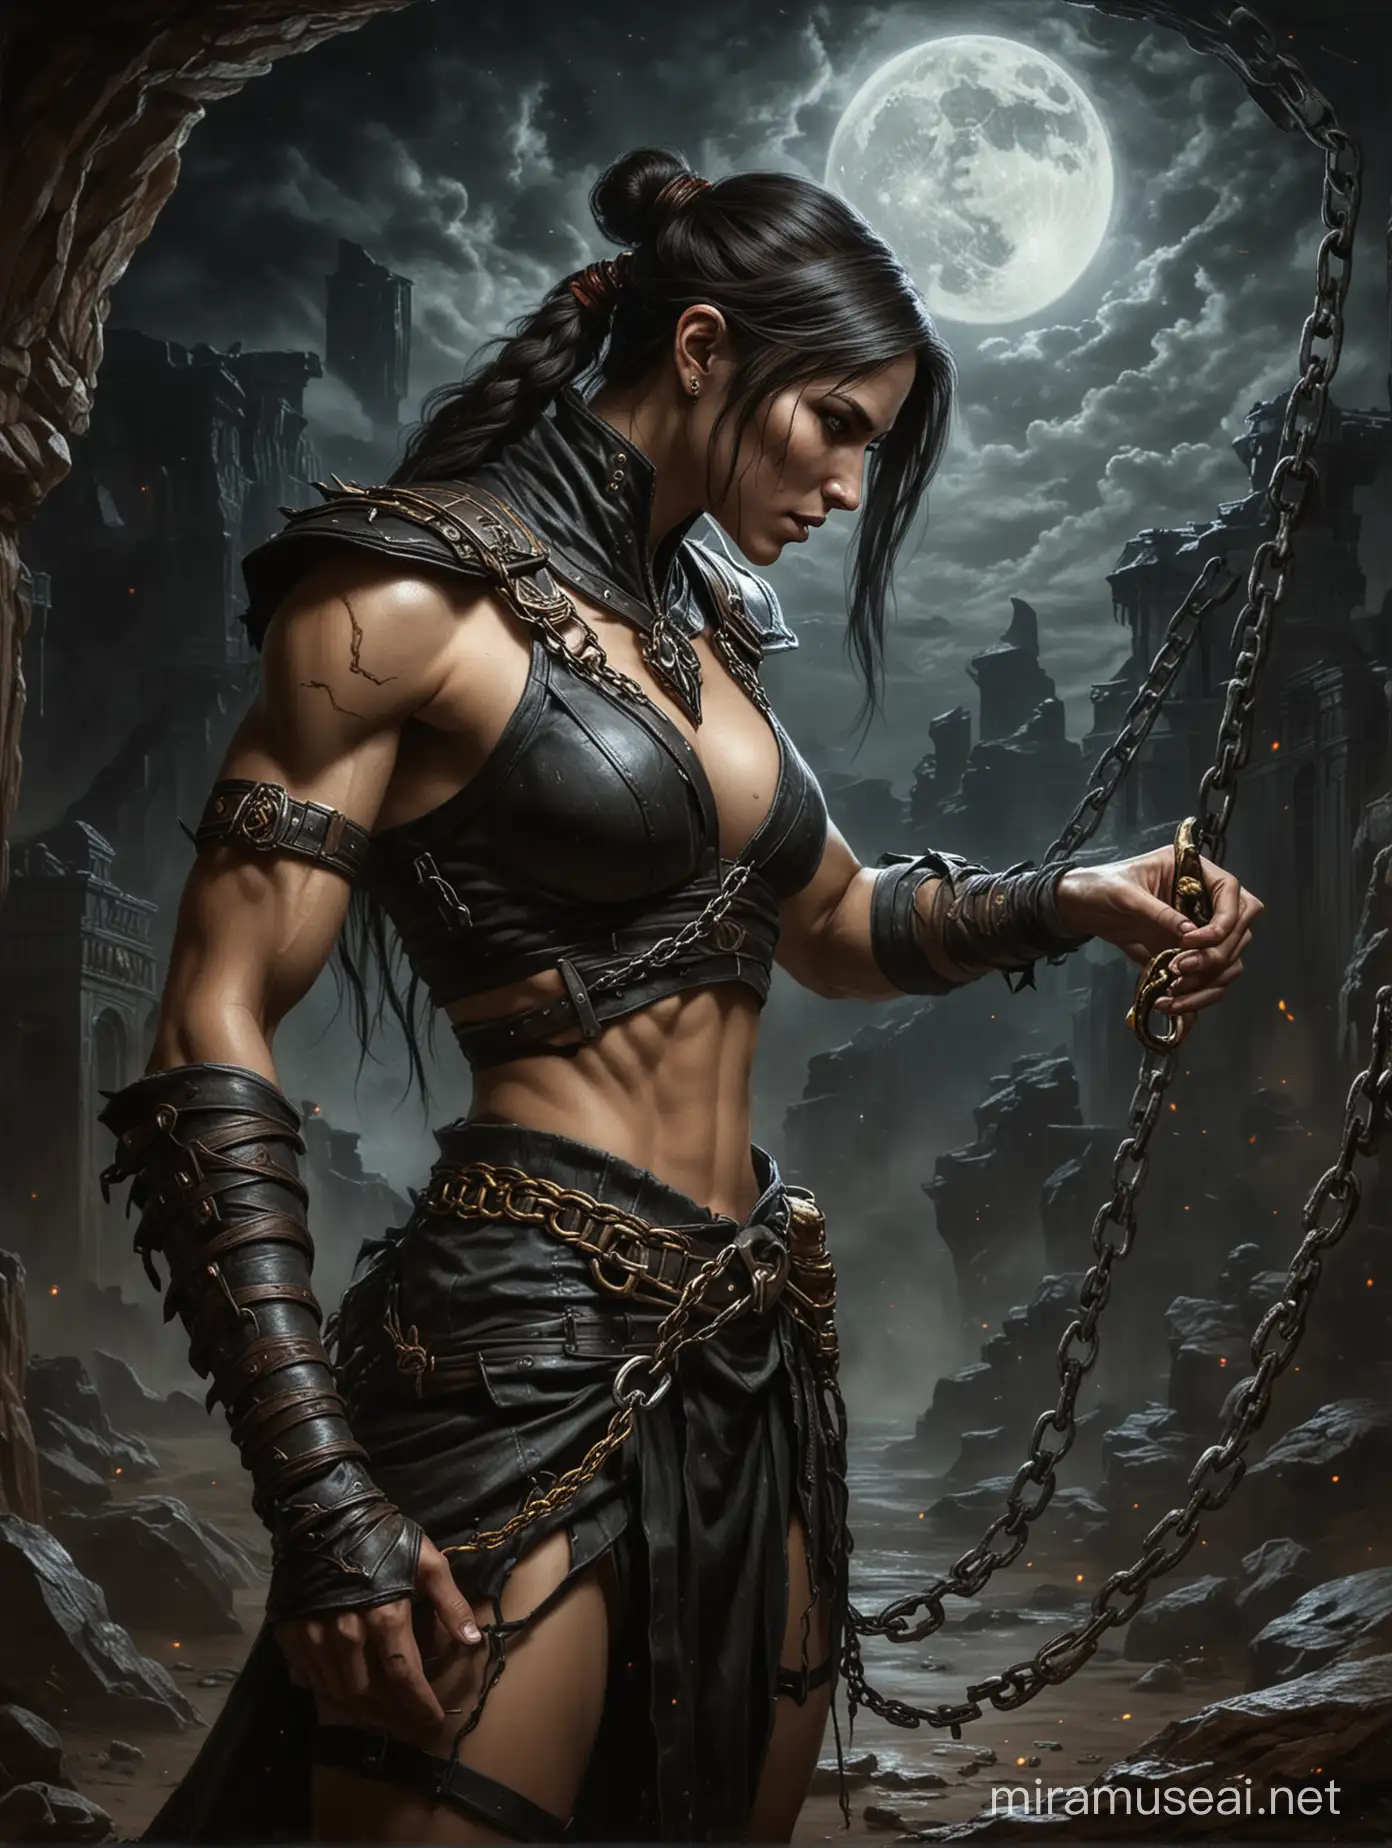 Scorpion from Mortal Kombat X Holding Chain in Earths Darkness with Lilith Baroque Oil Painting